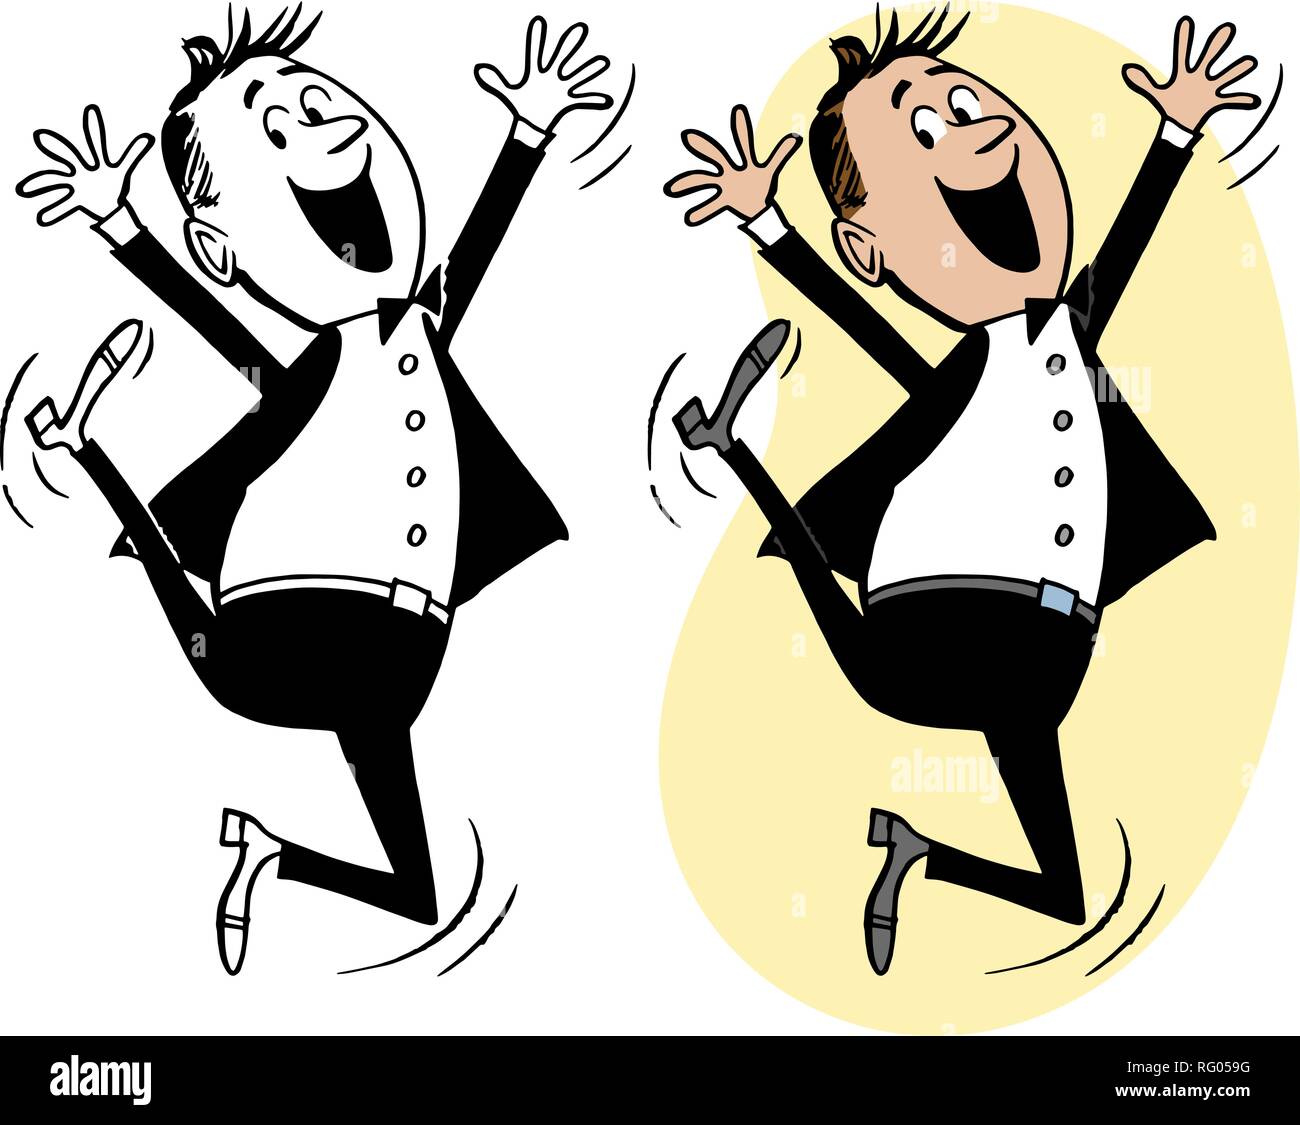 A happy man literally jumping for joy. Stock Vector